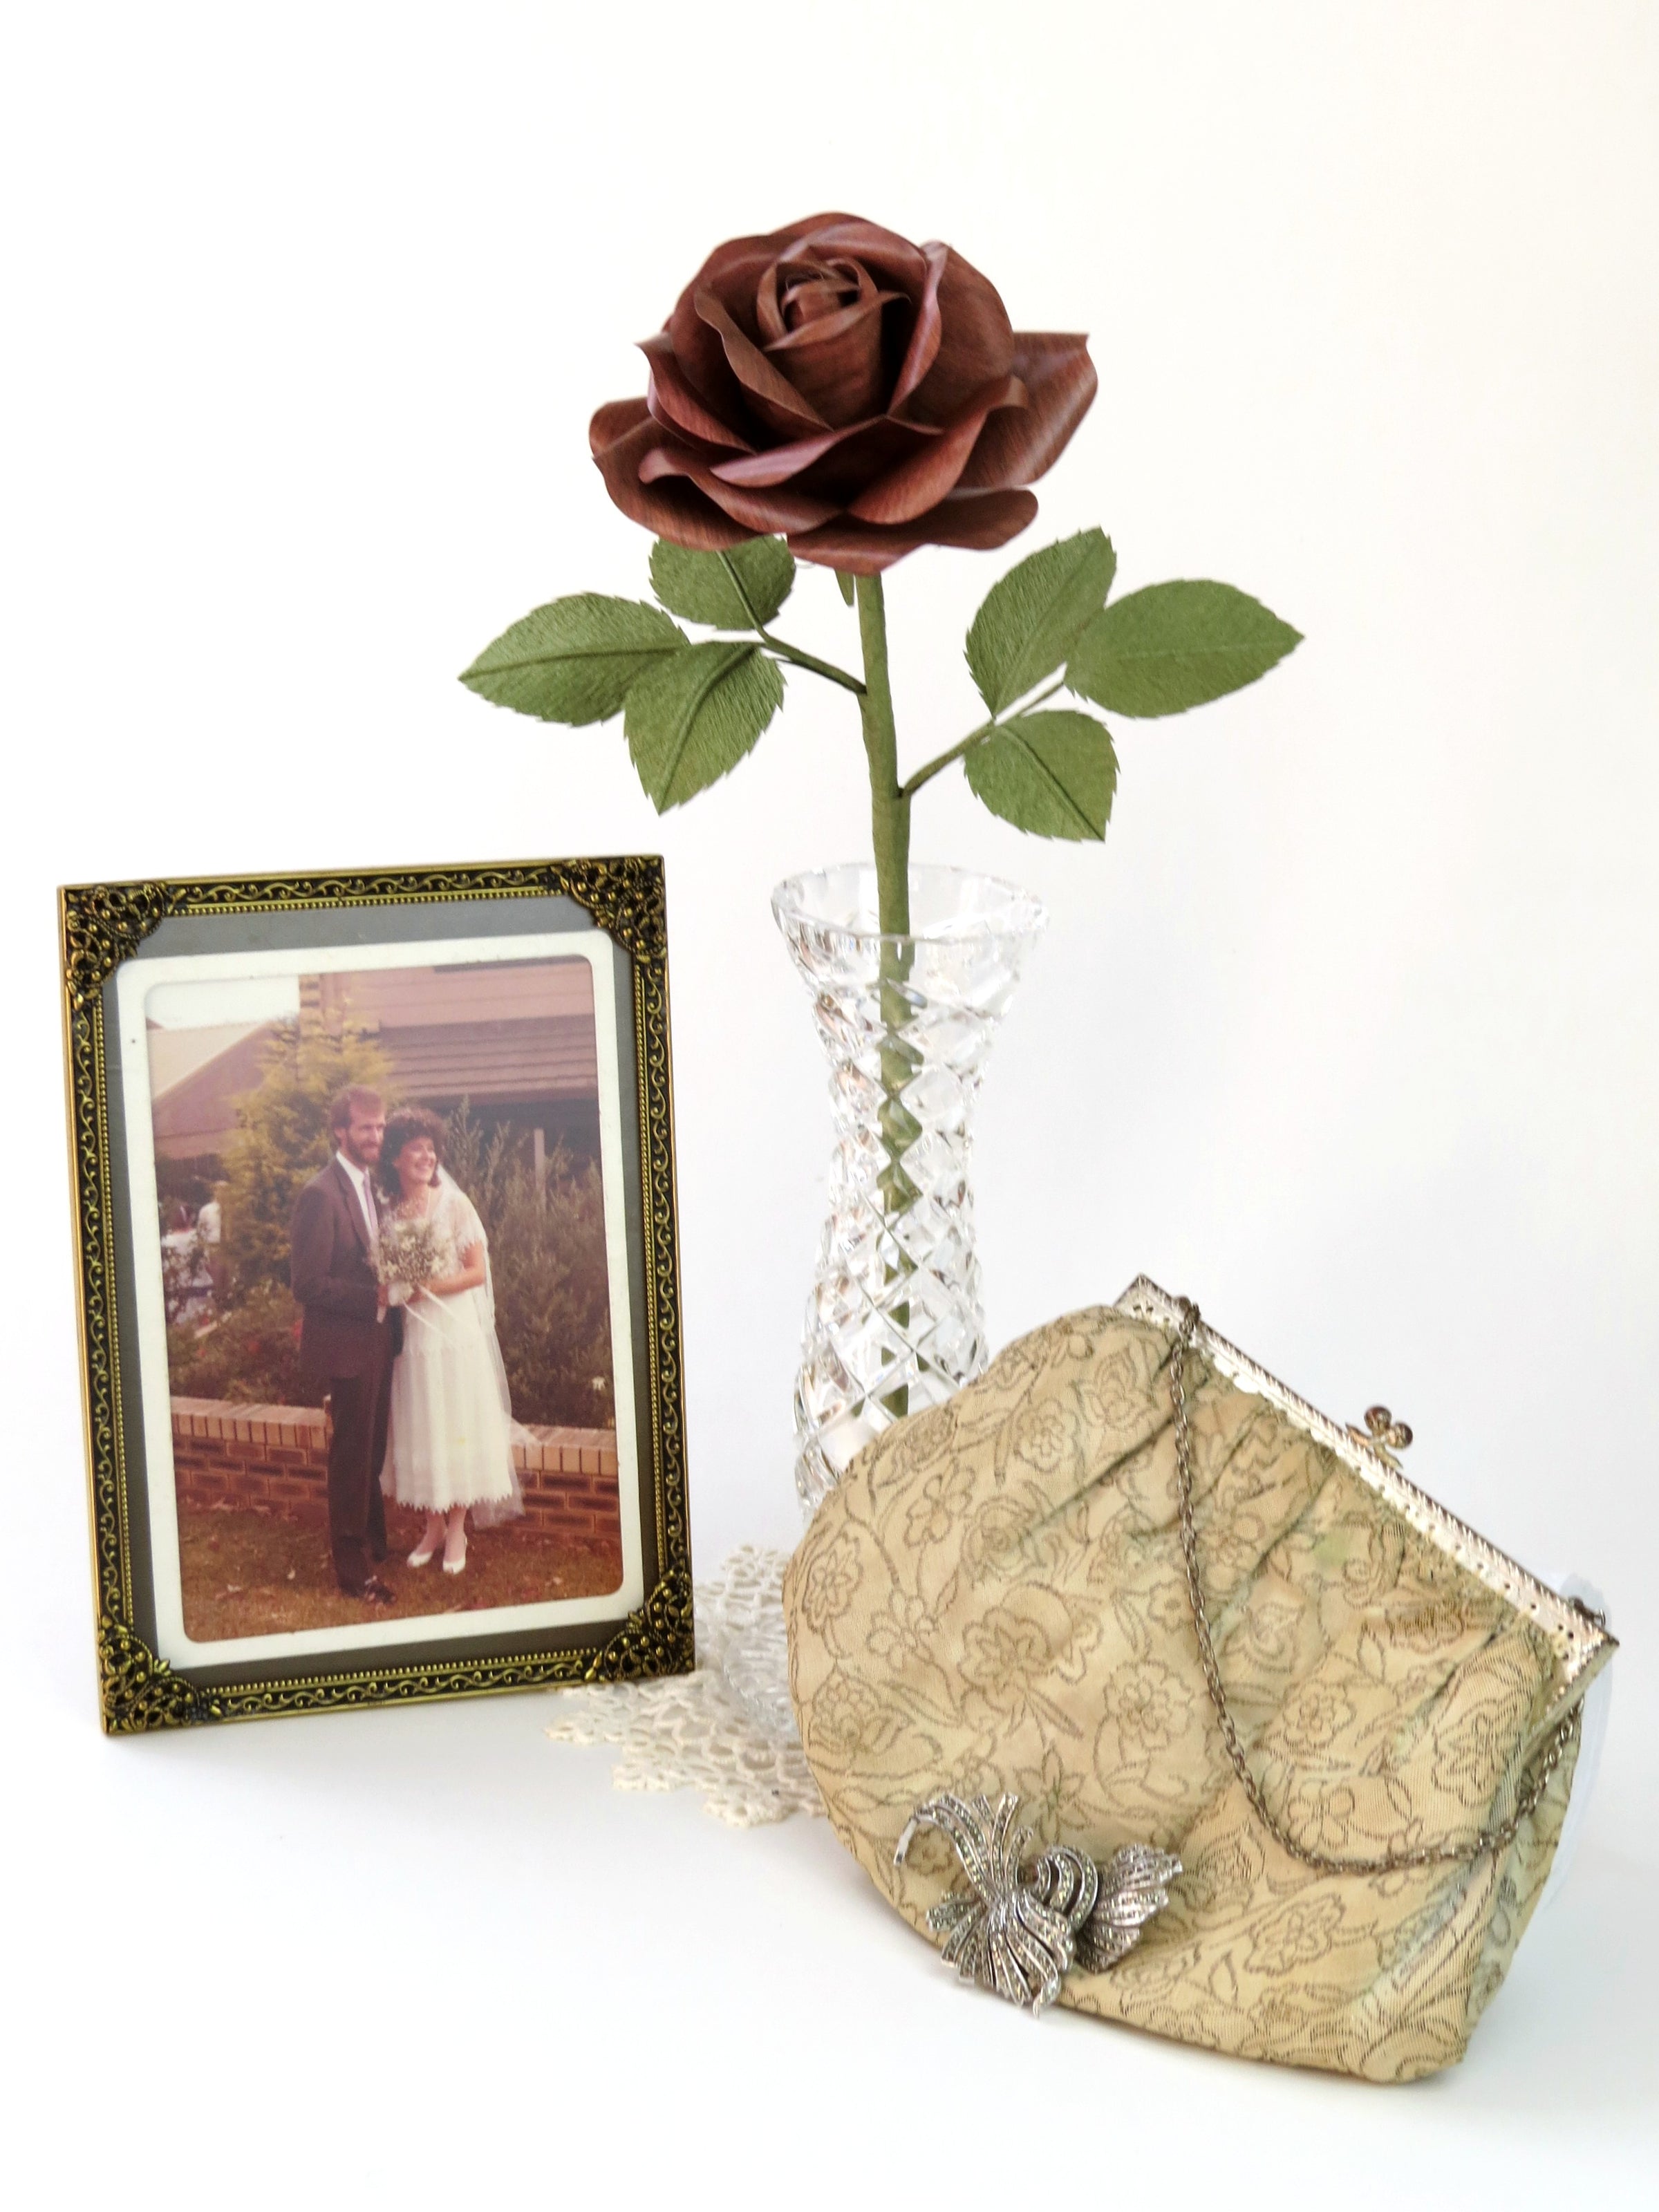 Dark wood grain paper rose with six green leaves standing in a slender glass vase on top of a white doily with a framed vintage wedding photo of a happy bride and groom standing beside it. To the right of the vase is a cream and silver floral vintage purse with a marcasite brooch resting on the front of it. 